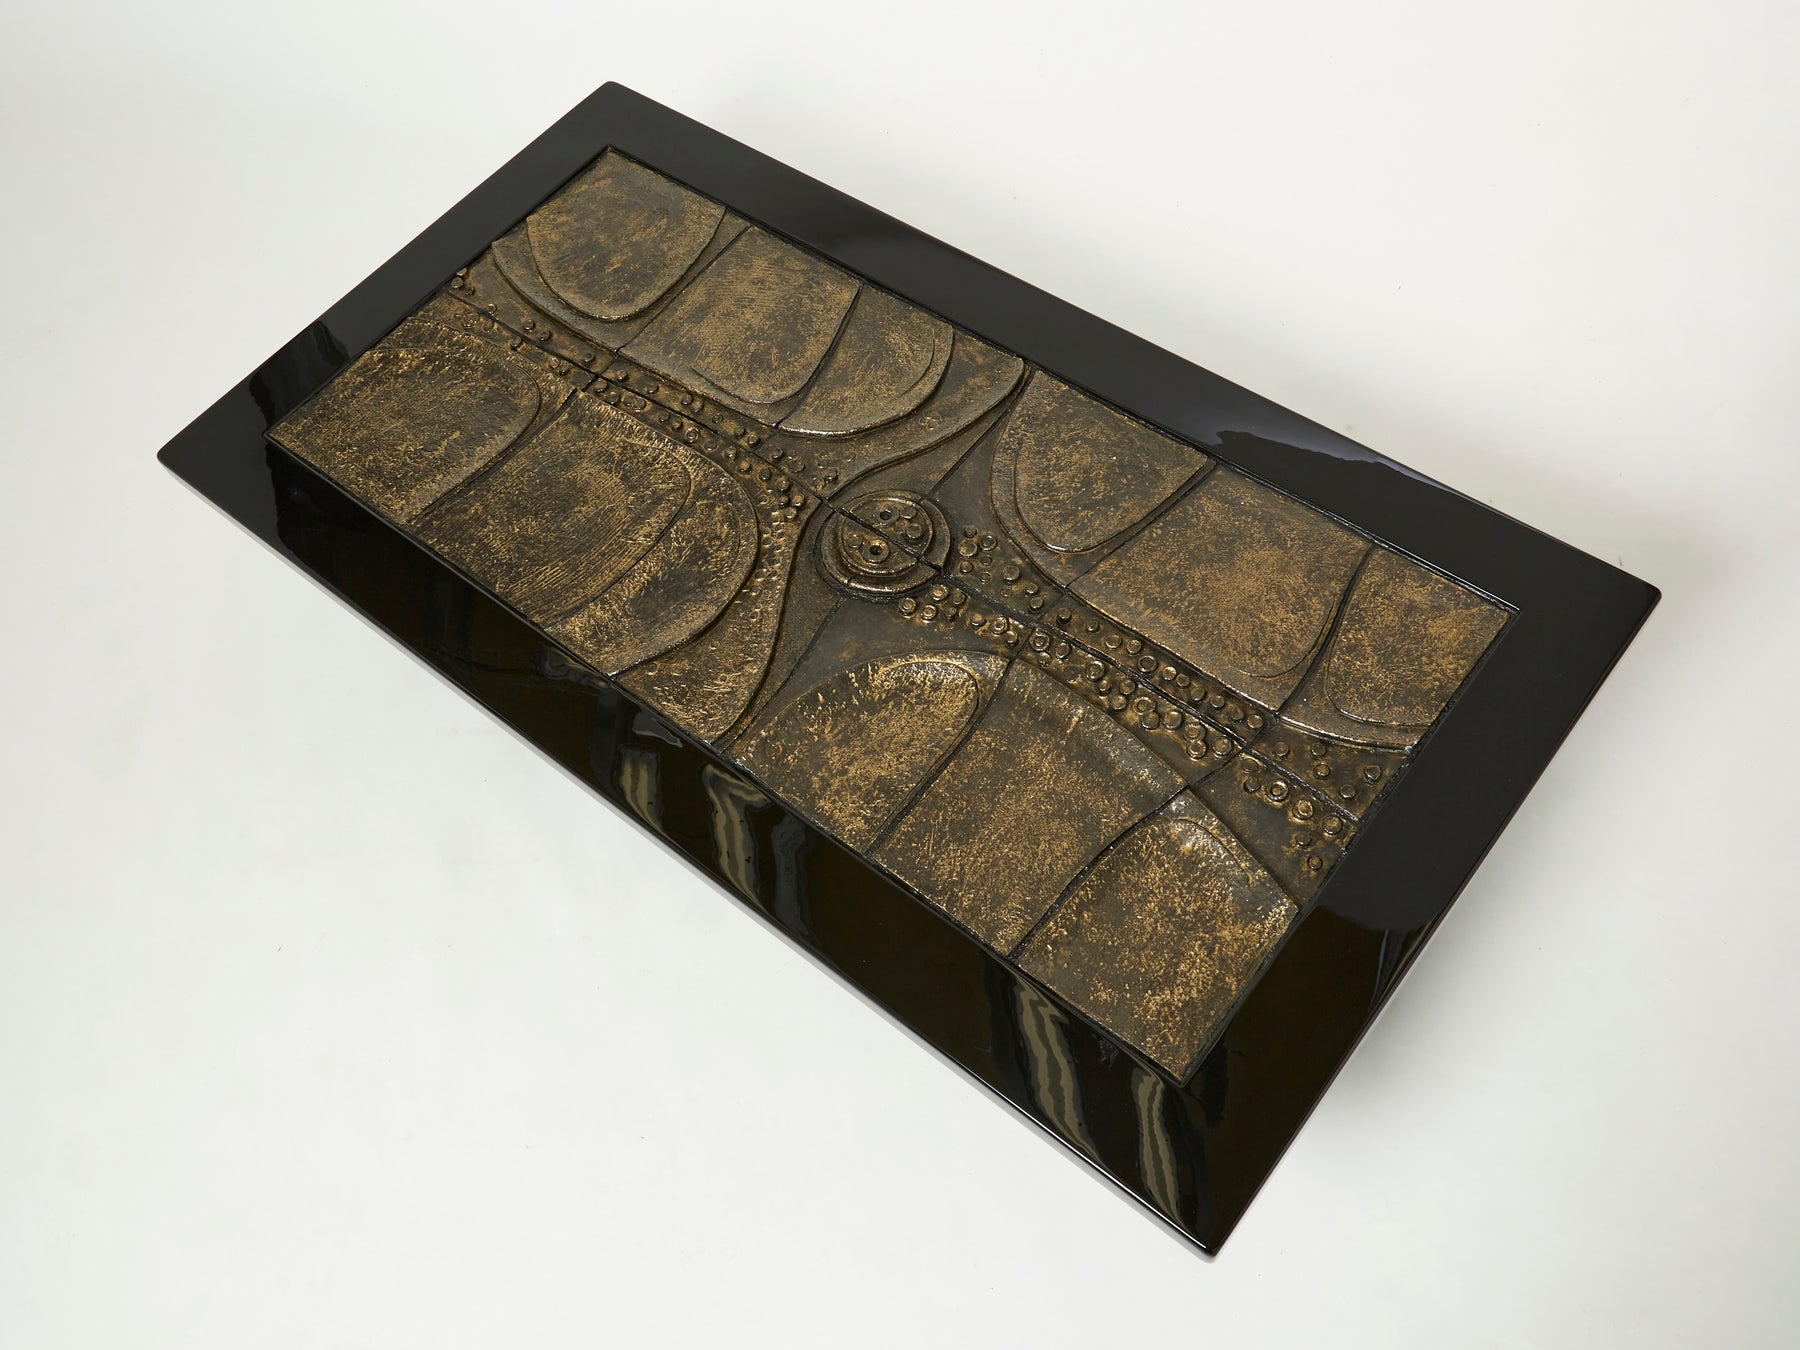 Belgian brutalist ceramic lacquer coffee table by Pia Manu 1970s